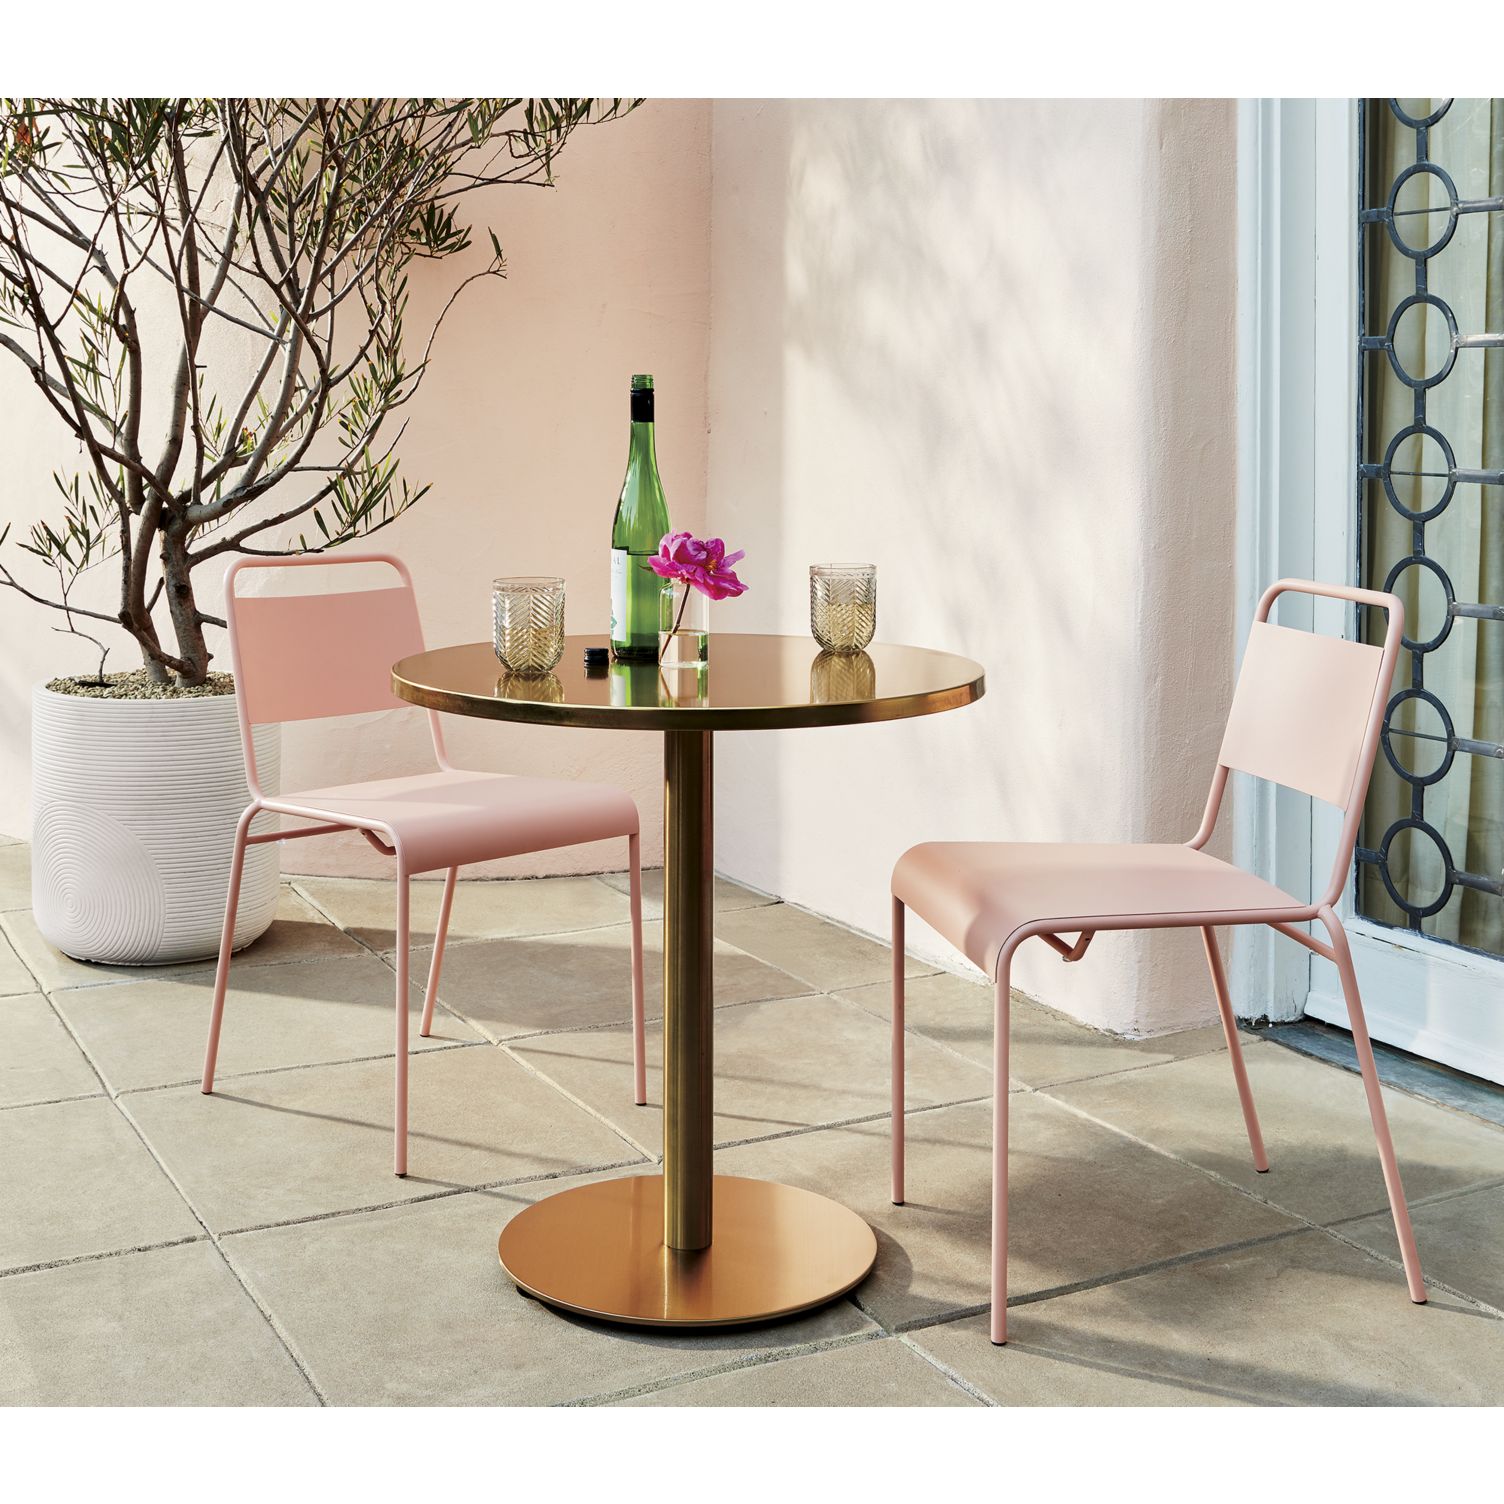 Outdoor-chairs-in-a-shade-of-blush